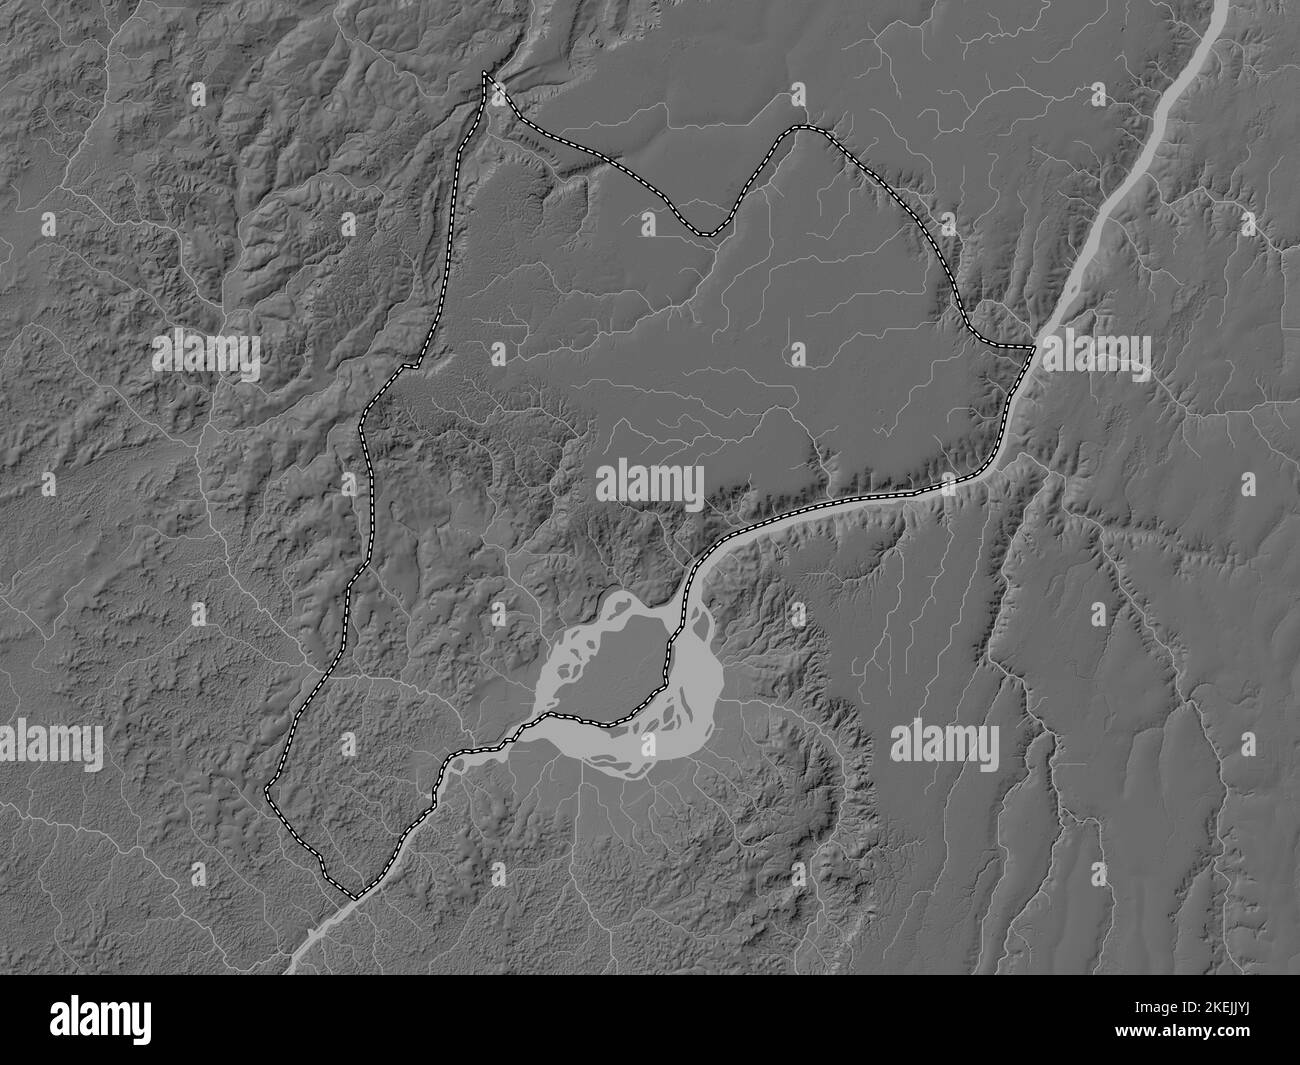 Brazzaville, region of Republic of Congo. Grayscale elevation map with lakes and rivers Stock Photo